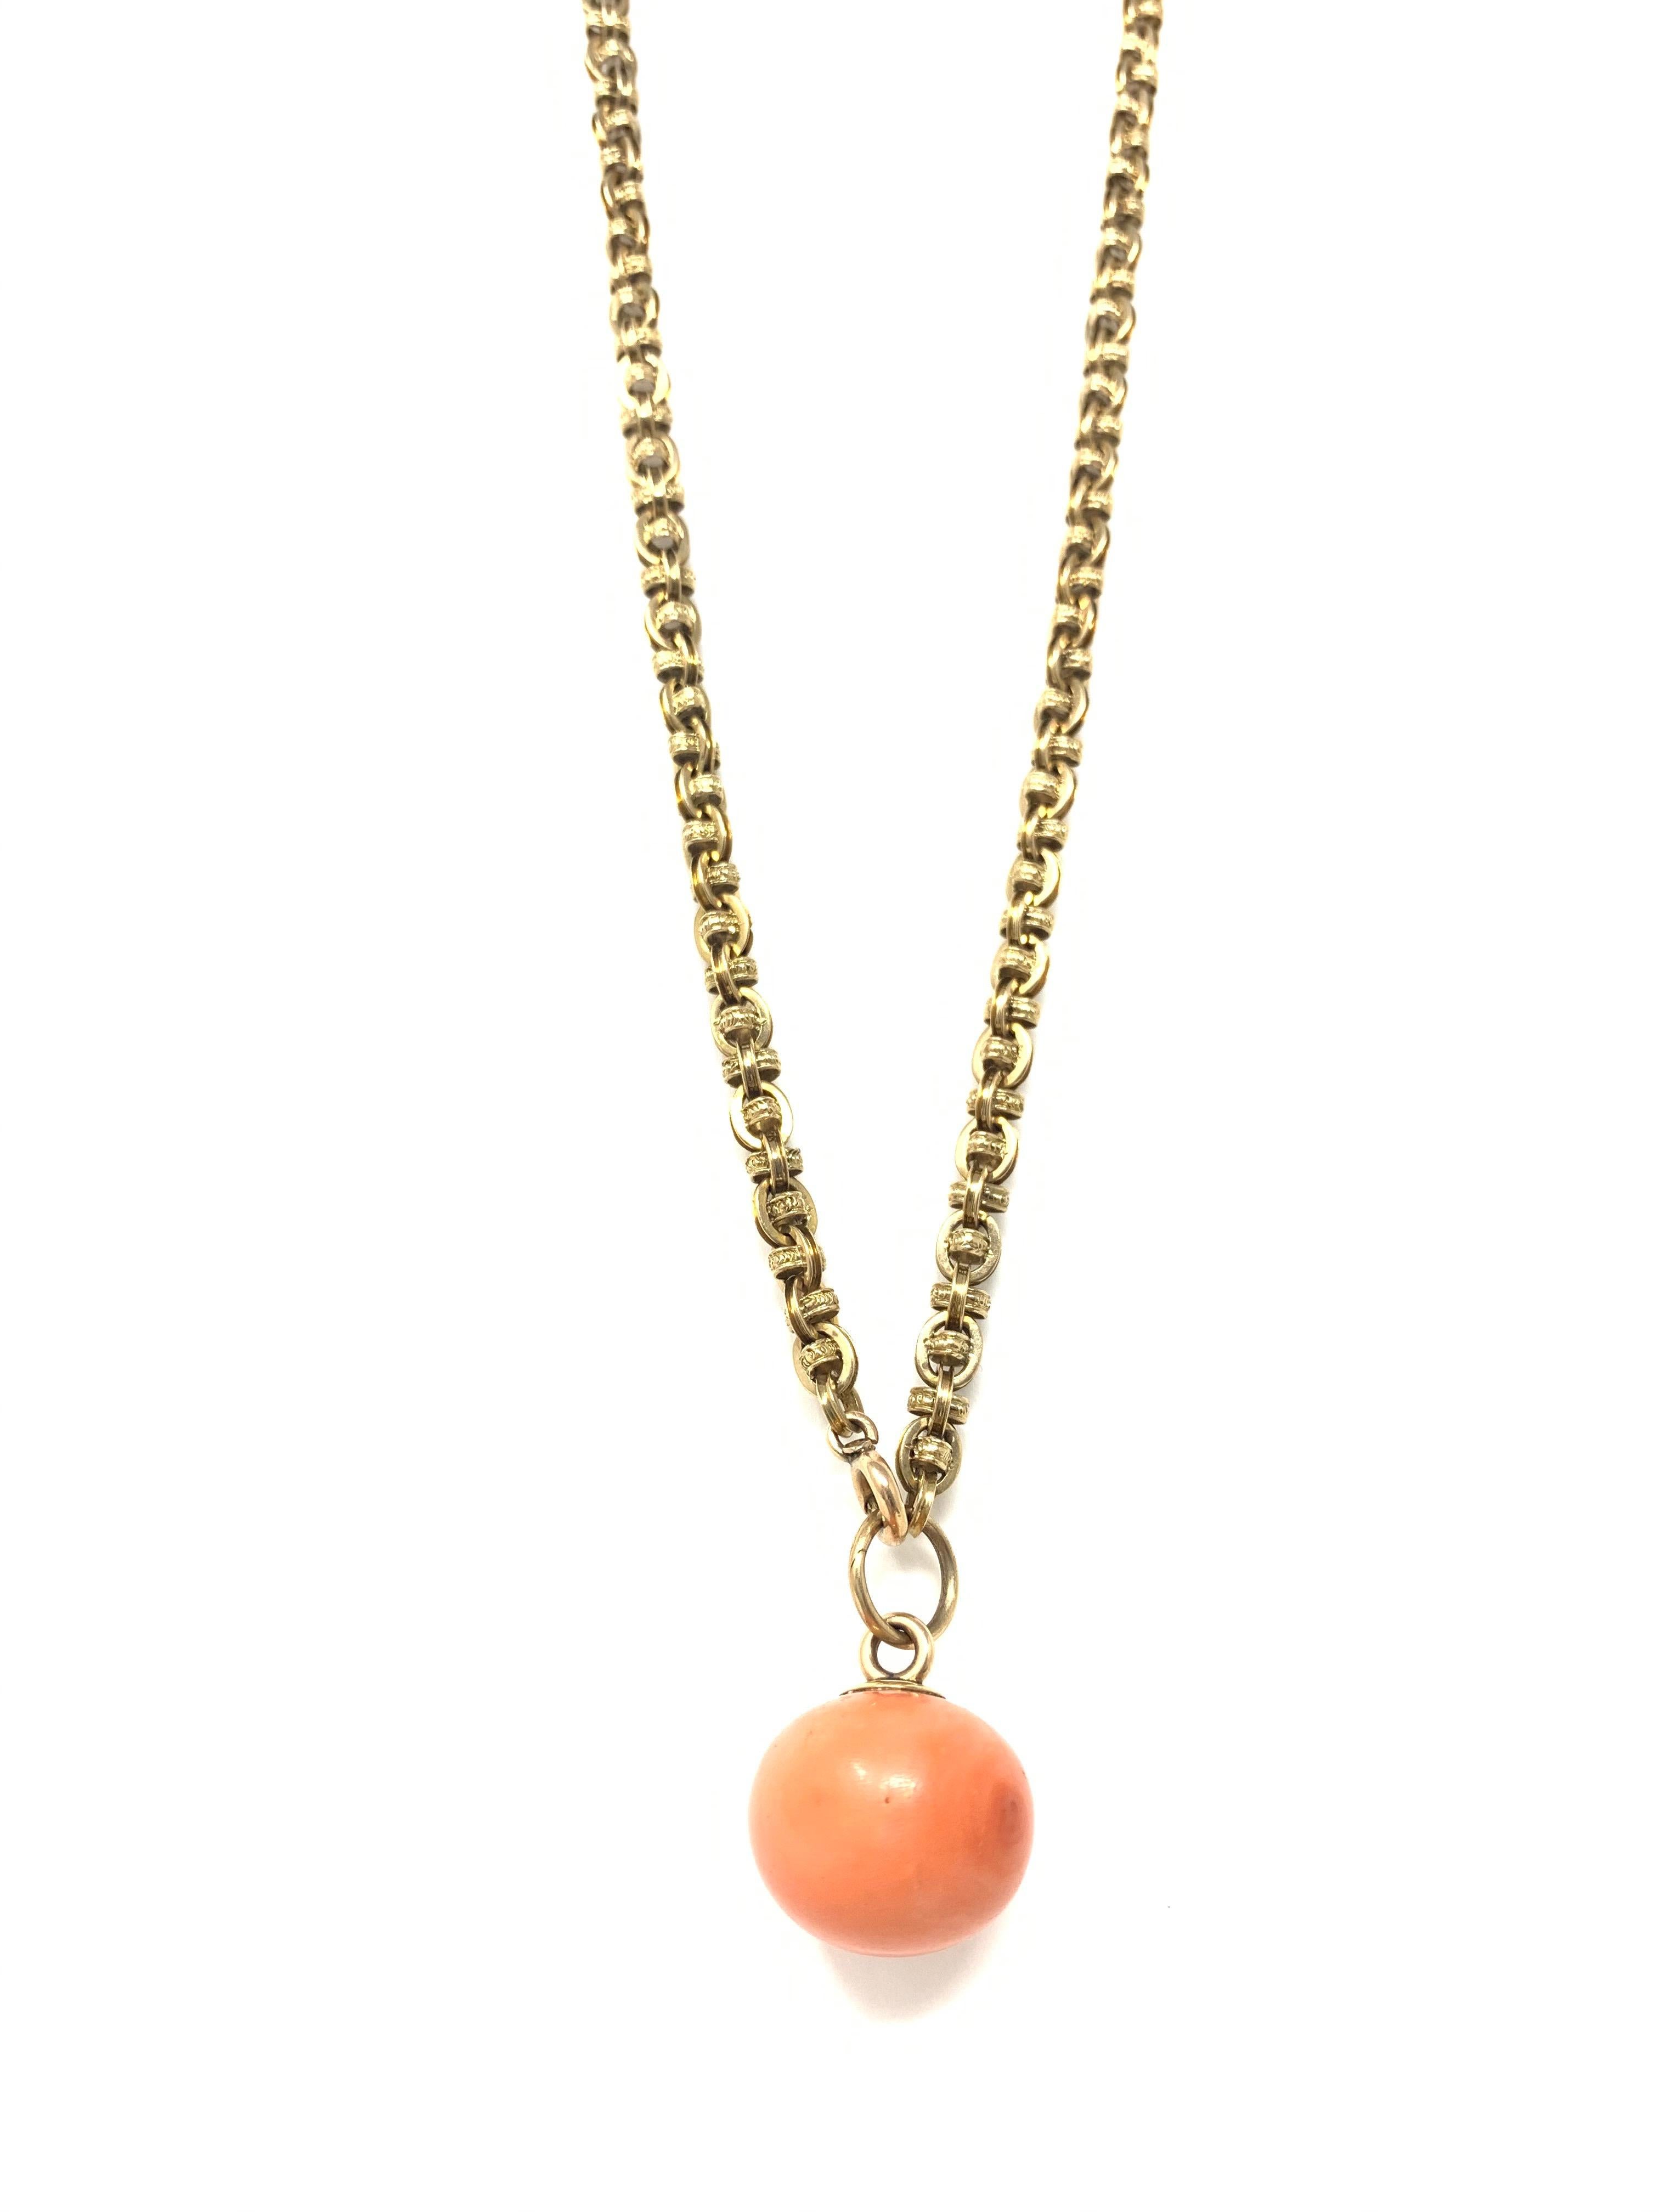 Moguldiam Inc Antique Coral Gold Necklace. 
Coral Measurements : 18mm-18mm-15mm 
Necklace length : 11 1/4 inches with pendant 
10 1/2 inches without pendant